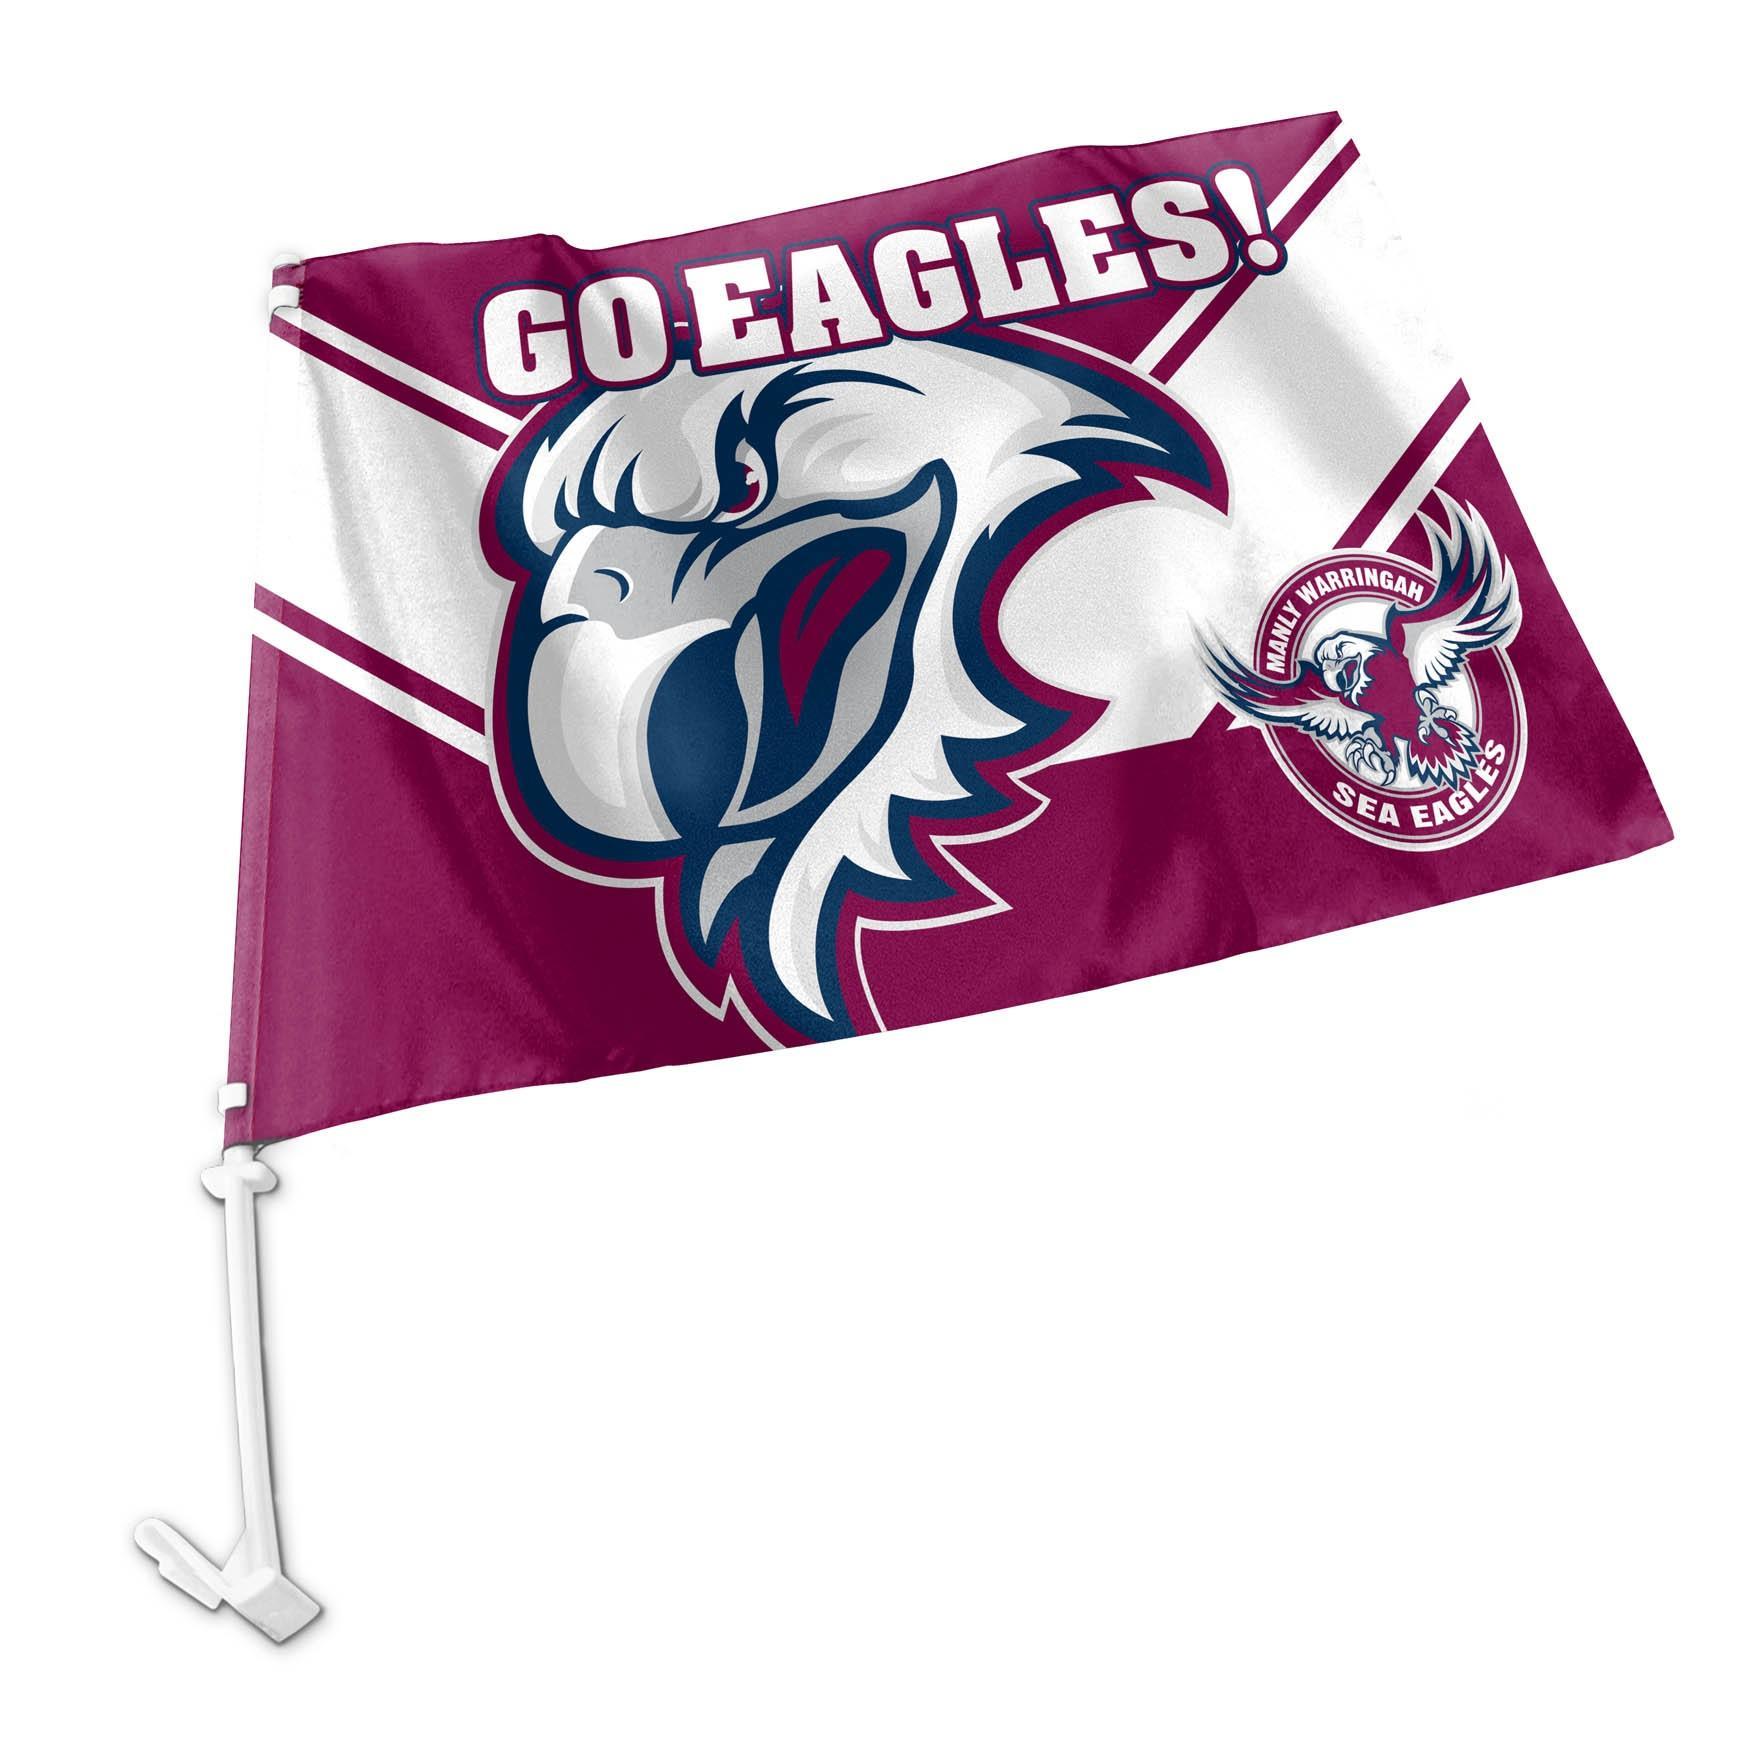 Manly Sea Eagles NRL Car Flag * Easy to Attach to Any Car!